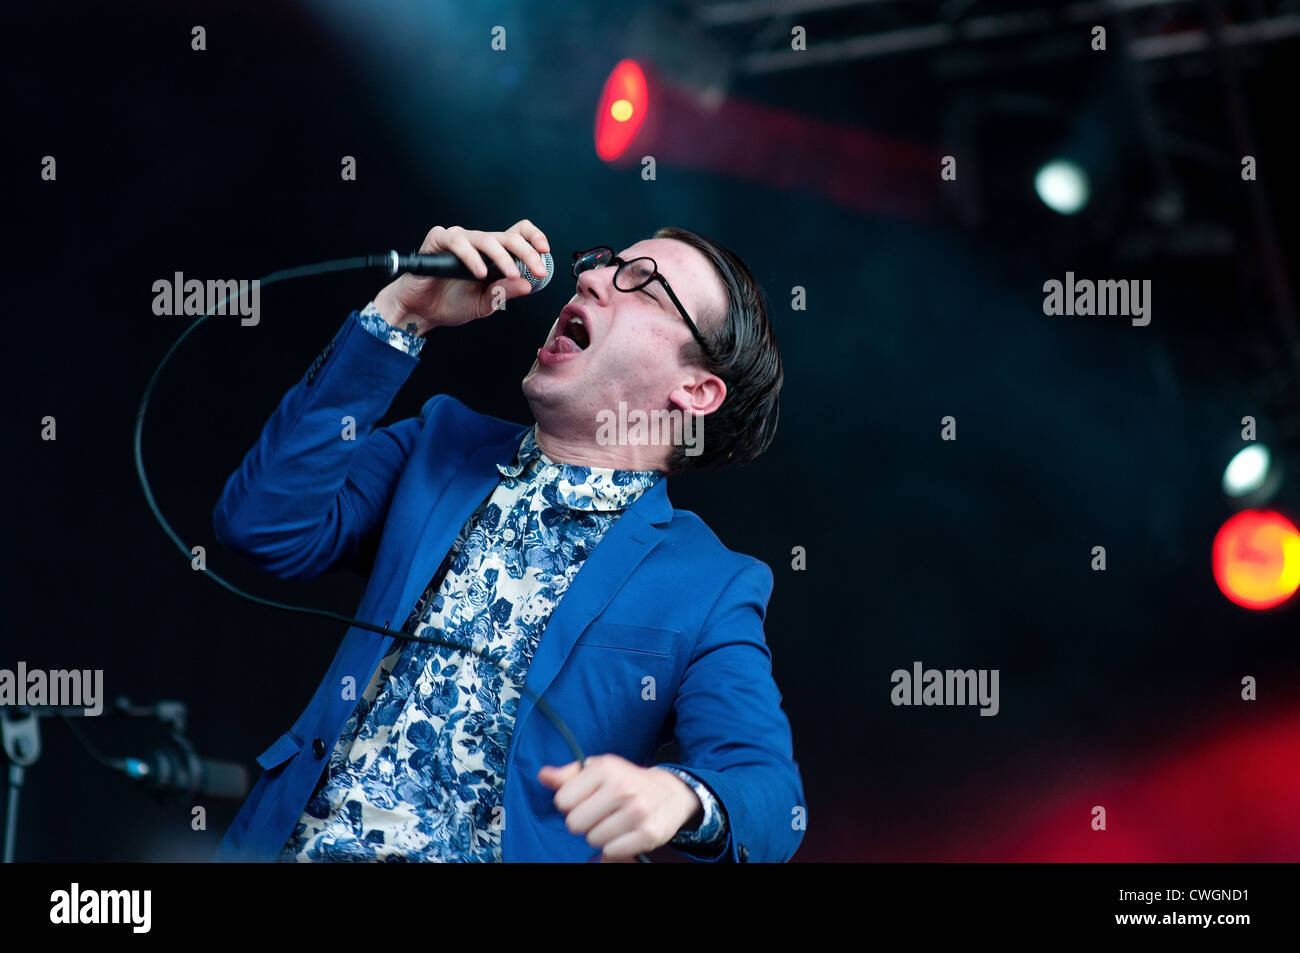 BENICASSIM, SPAIN - JULY 15: Spector band performs at FIB on July 15, 2012 in Benicassim, Spain. Stock Photo